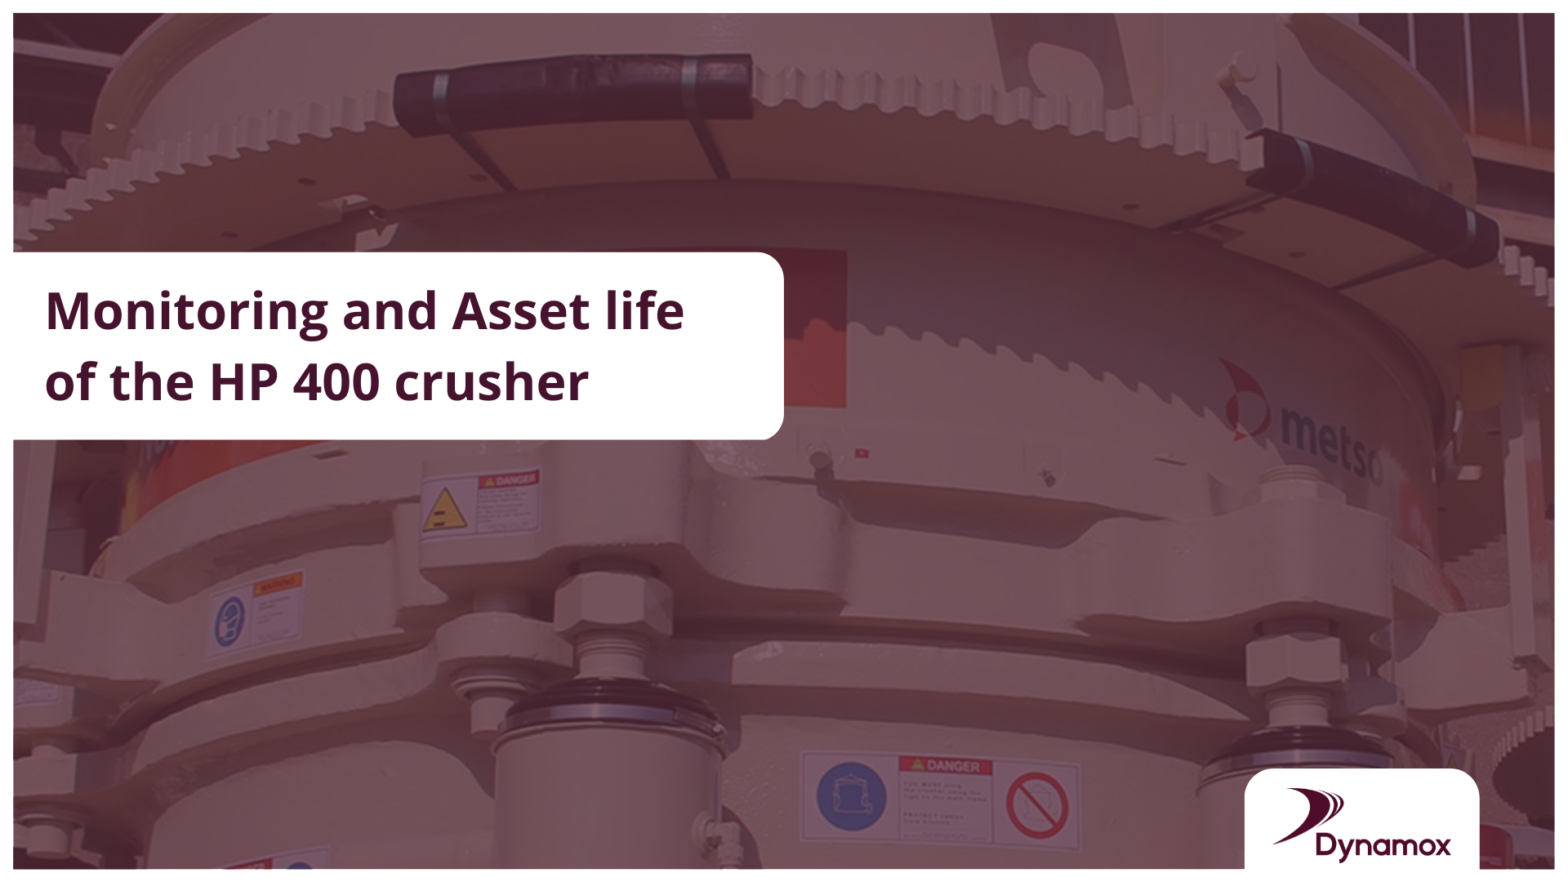 Monitoring and Asset life of the HP 400 crusher